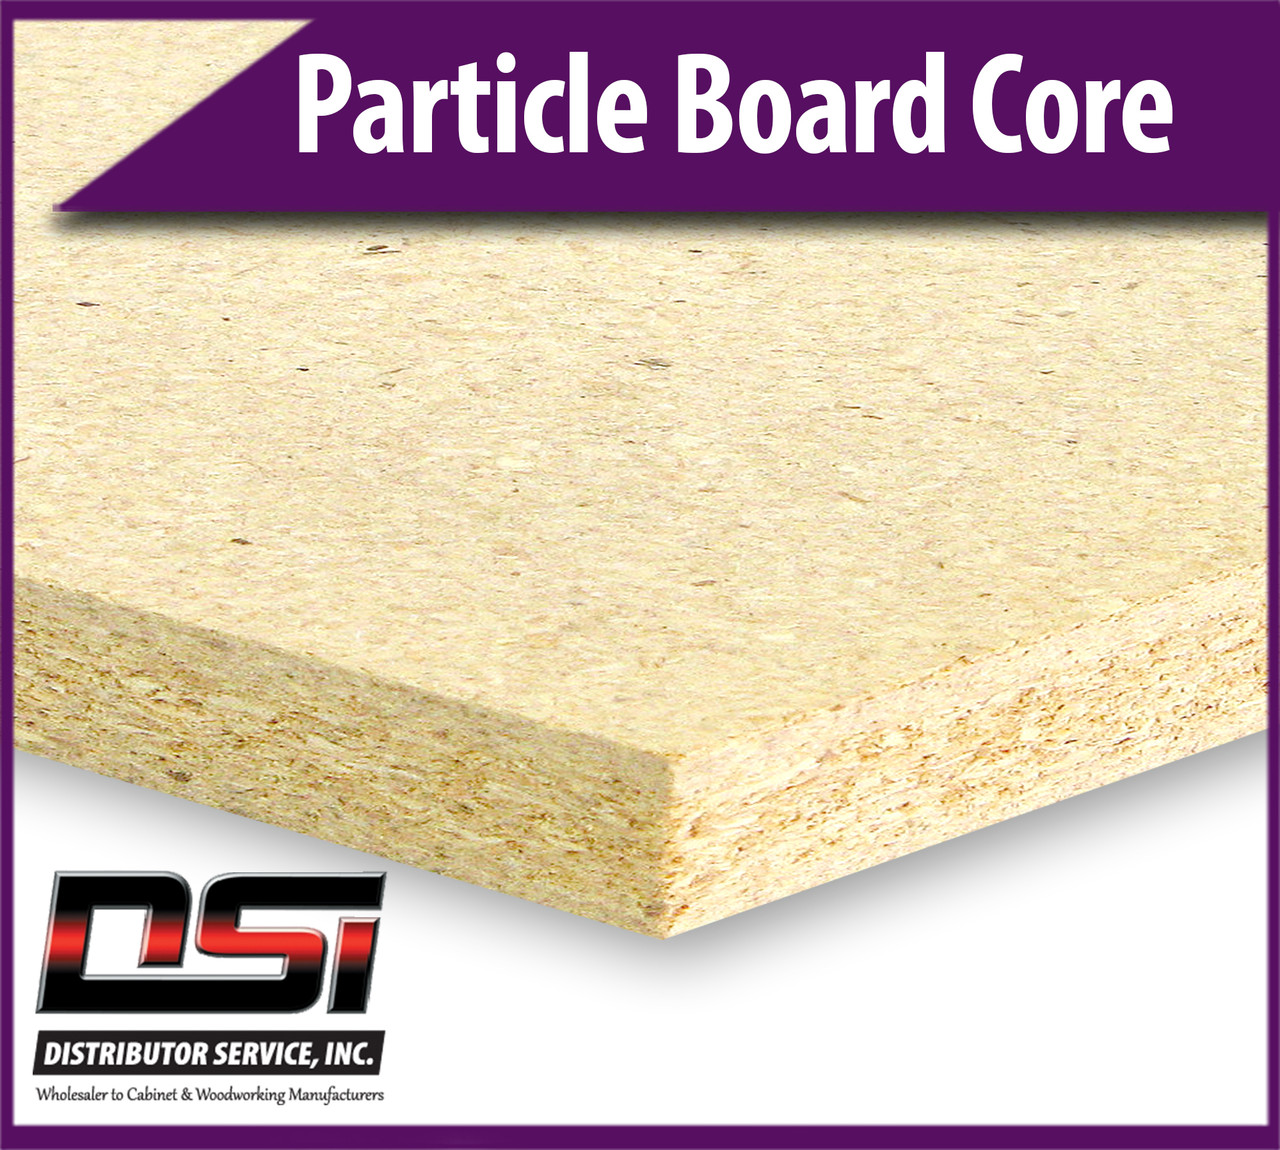 Particle Board Core 1-1/8" x 61" x 97" Industrial Particleboard Panels